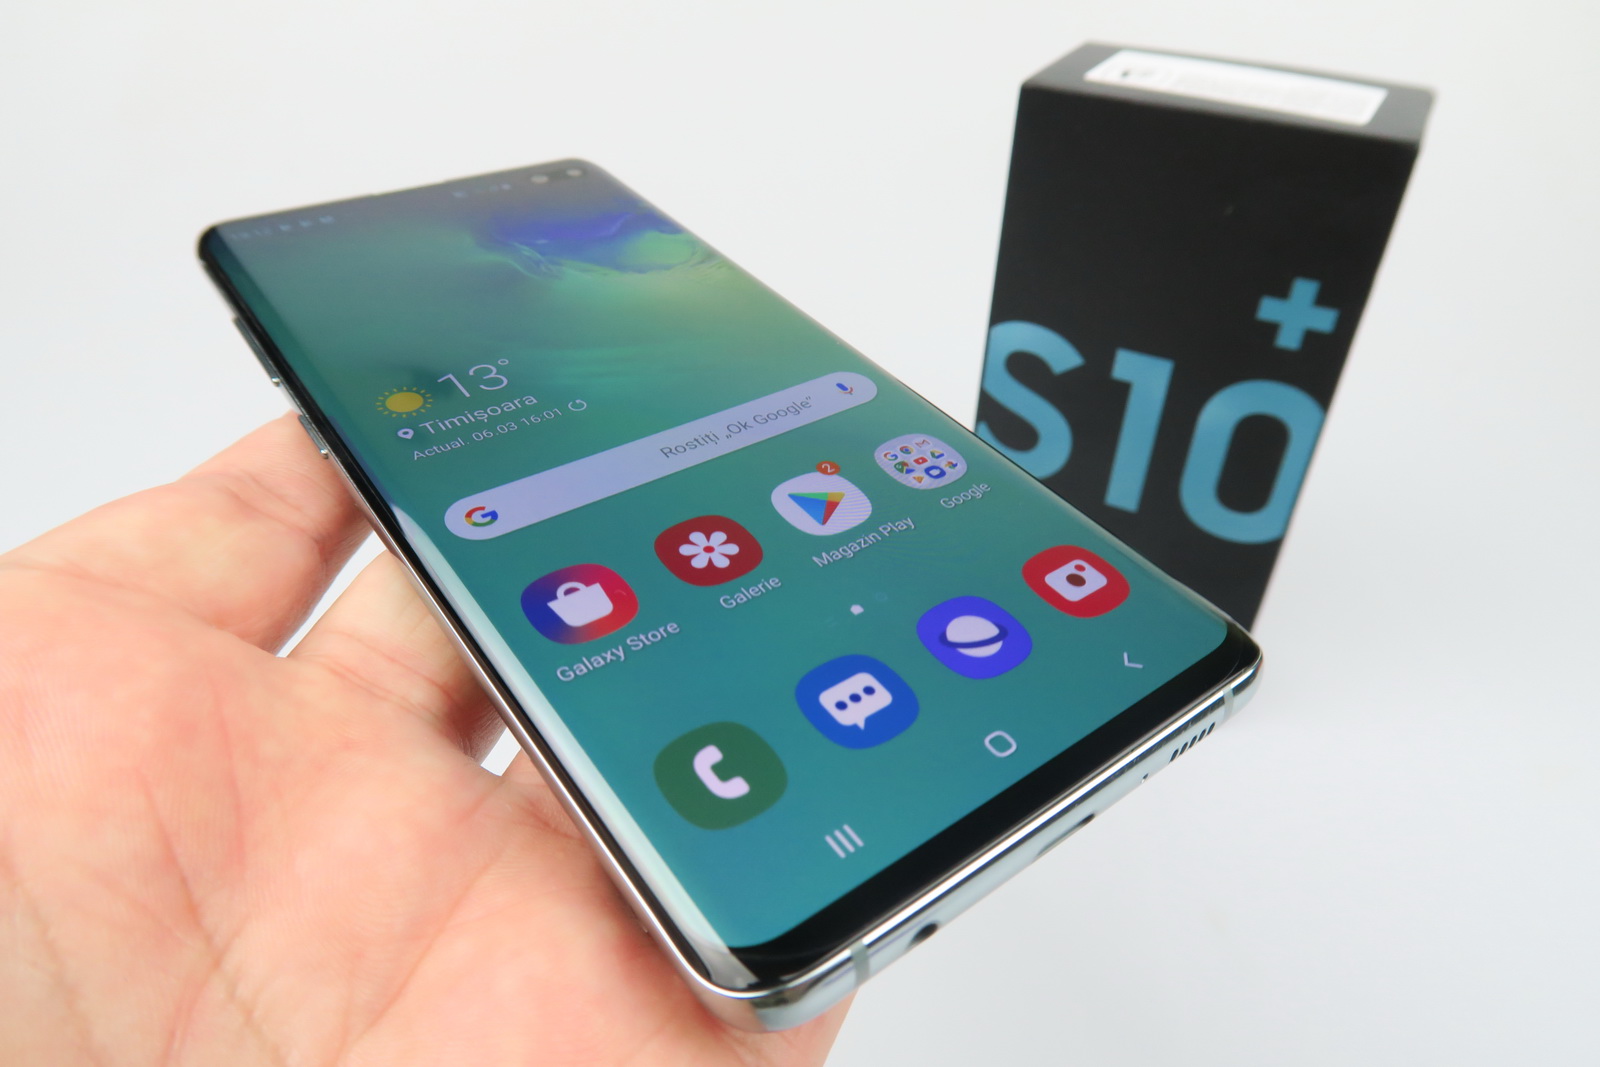 Samsung Galaxy S10 Unboxing 5 Cameras Up To 12 Gb Of Ram And